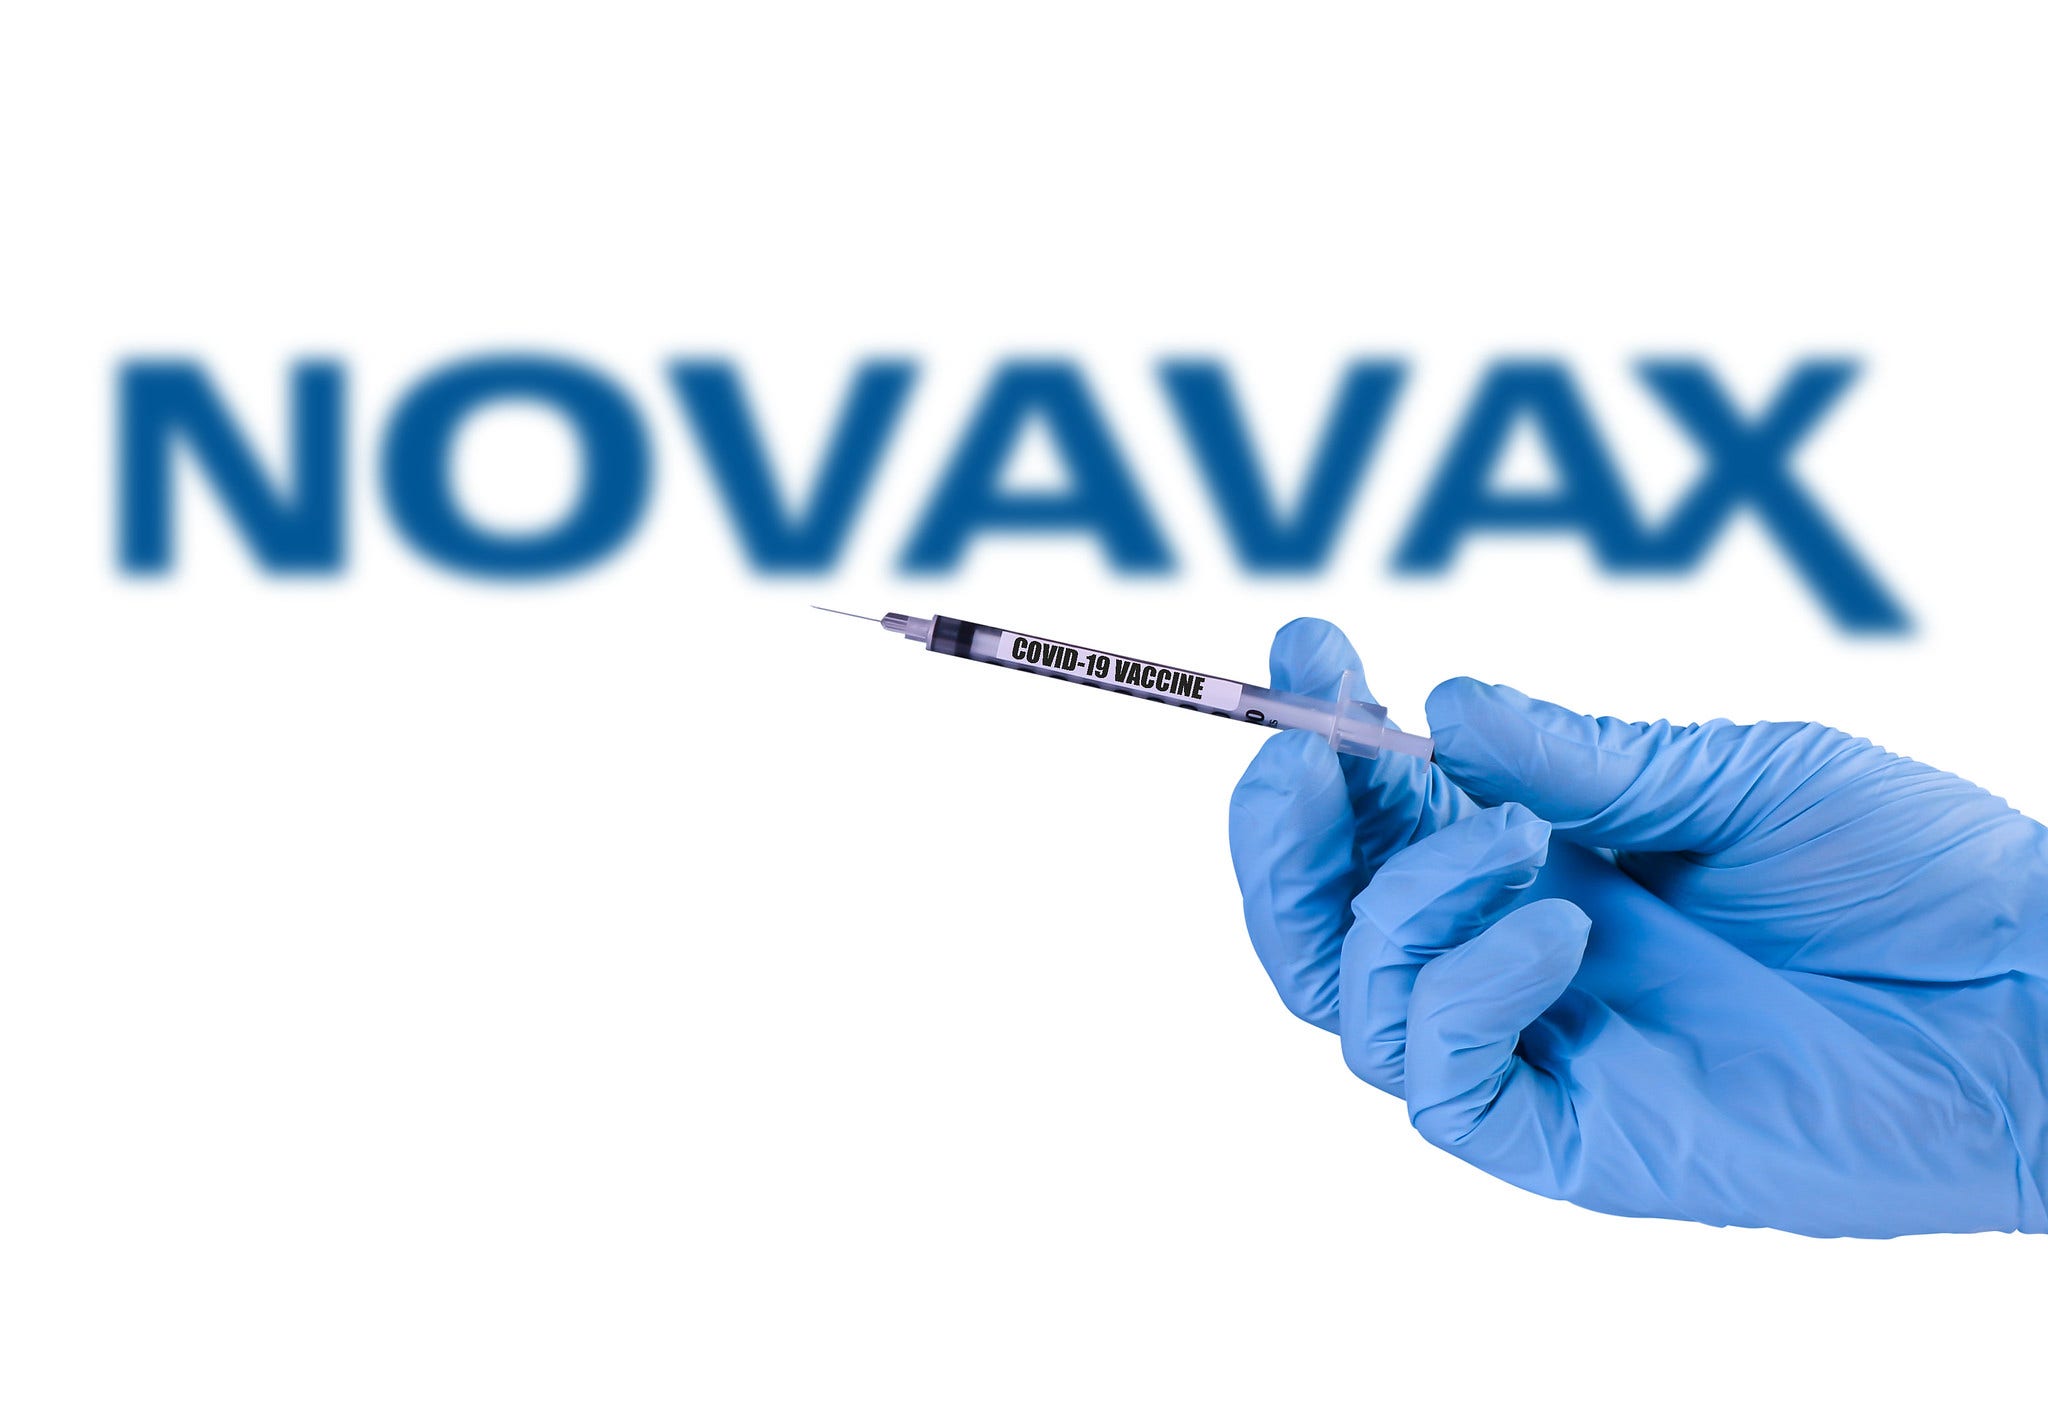 Why Novavax Stock Is Plunging Today